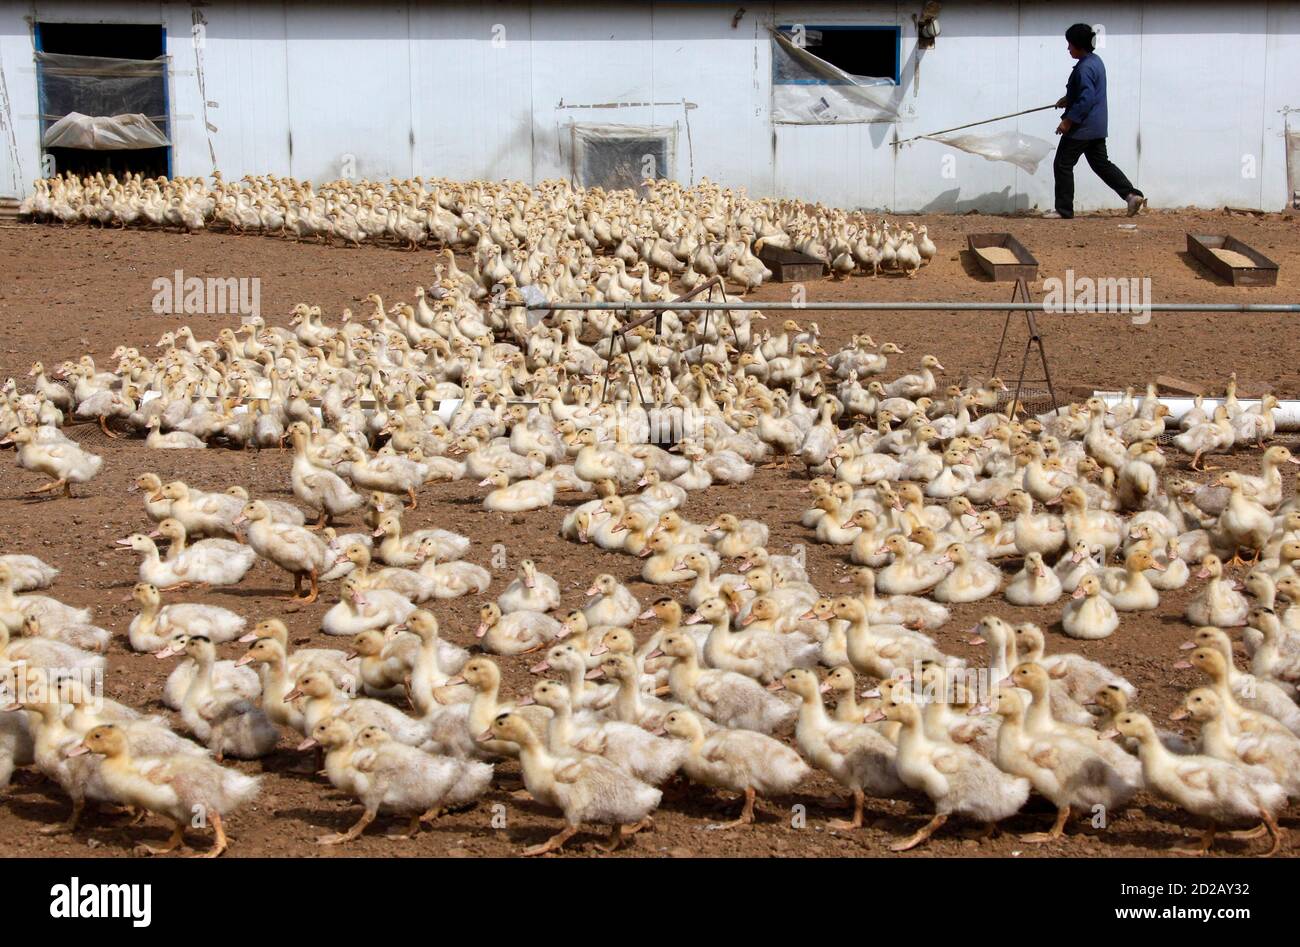 A worker leads ducks out of their shelter at a duck farm for the production  of foie gras, meaning 'fatty liver' in French, in the town of Yanqing,  located 70 kilometres north-west